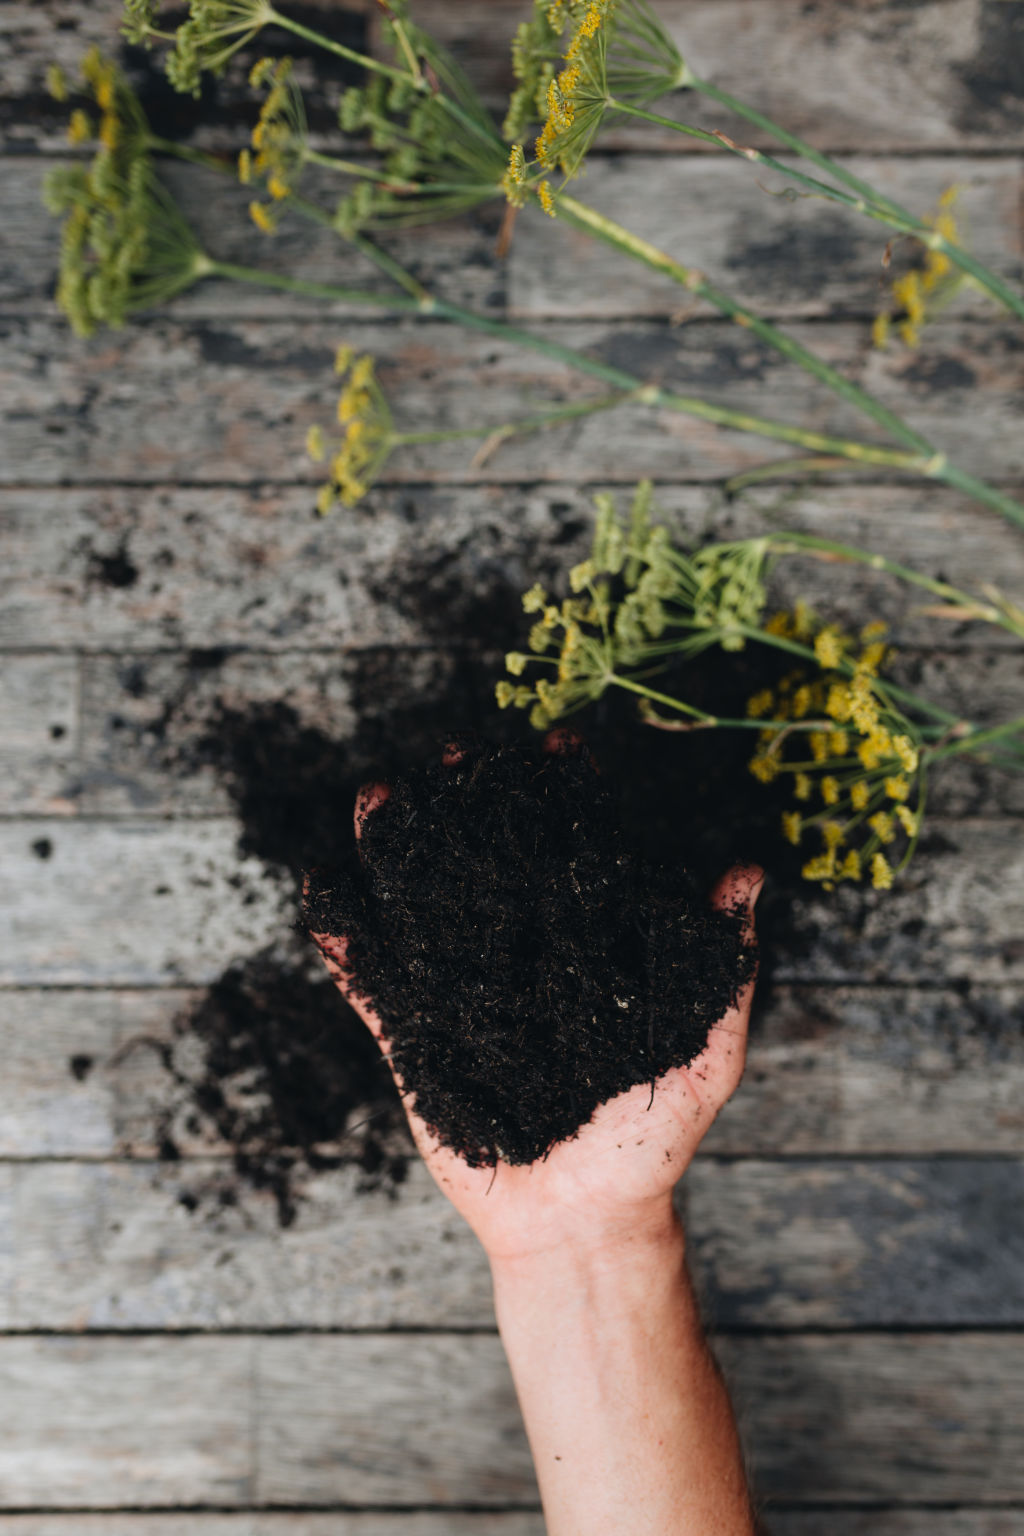 Creating your own compost is an easy addition to building a healthy soil. Photo: Alex Carlyle.